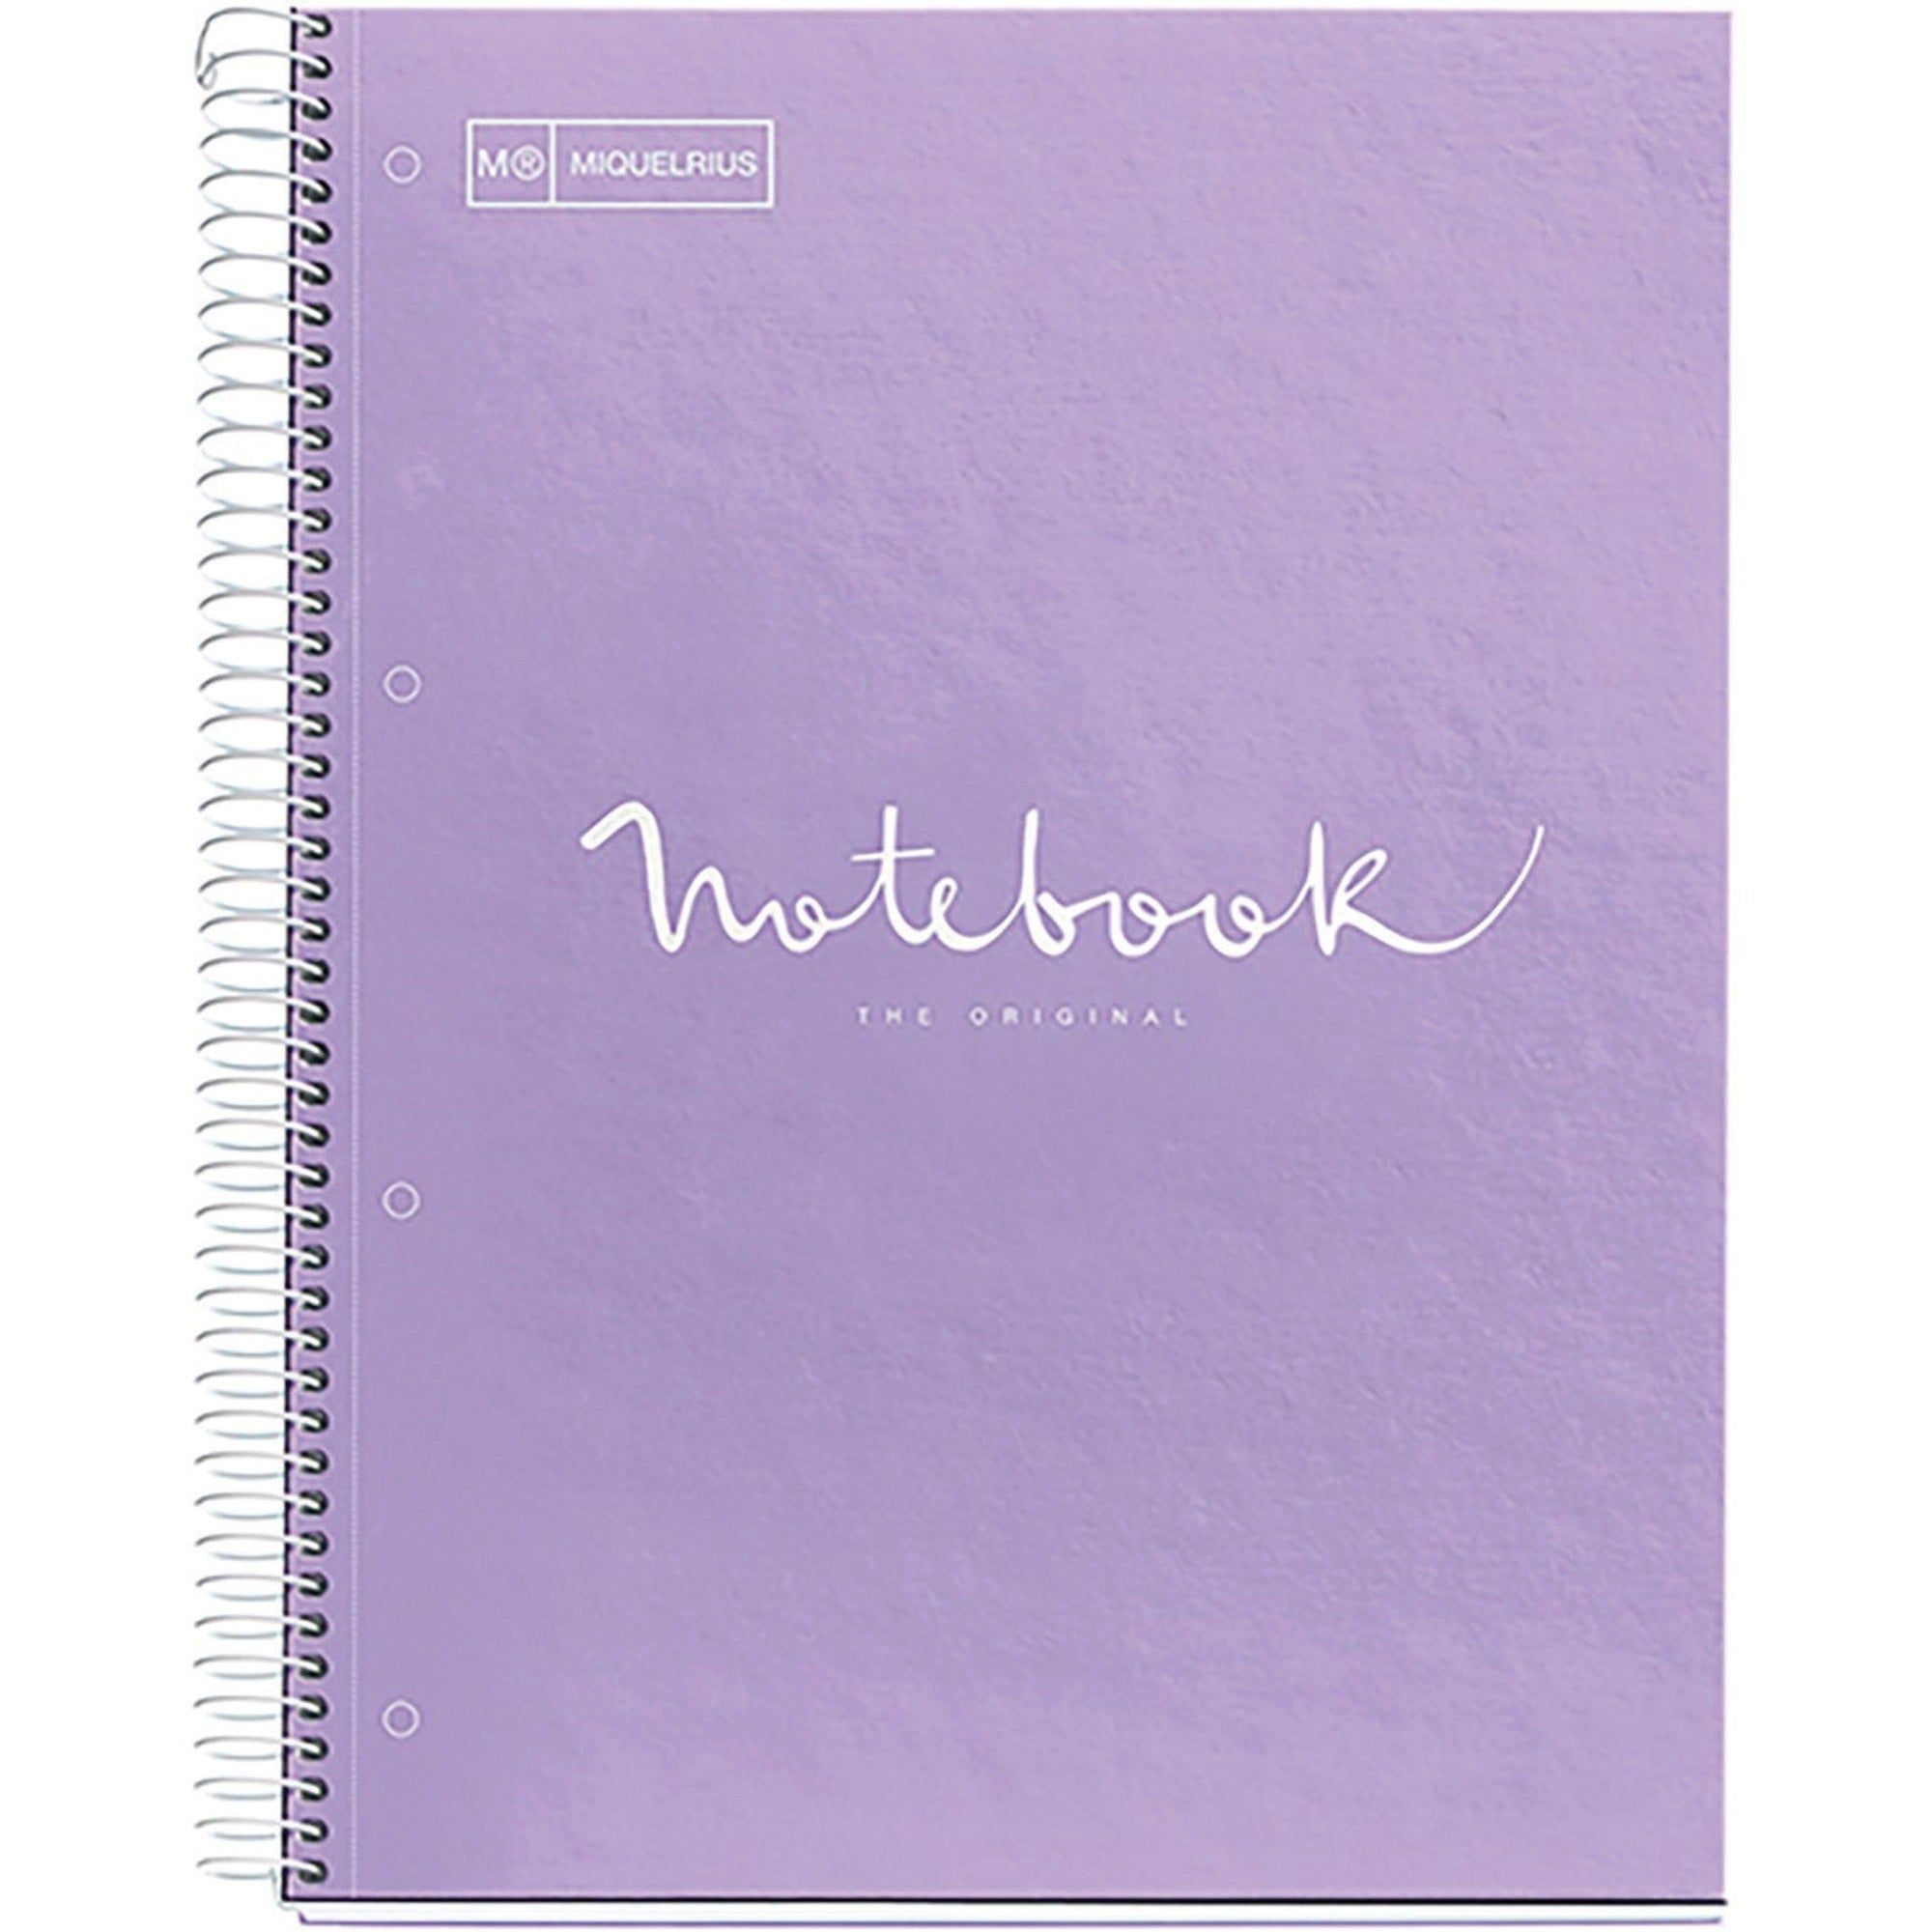 roaring-spring-fashion-tint-1-subject-notebook-1-subjects-wire-bound-3-holes-24-lb-basis-weight-030-x-85-x-11-cardboard-plastic-cover-perforated-hole-punched-sturdy-bleed-free-printed-durable-smooth-1-each_roa49281 - 1